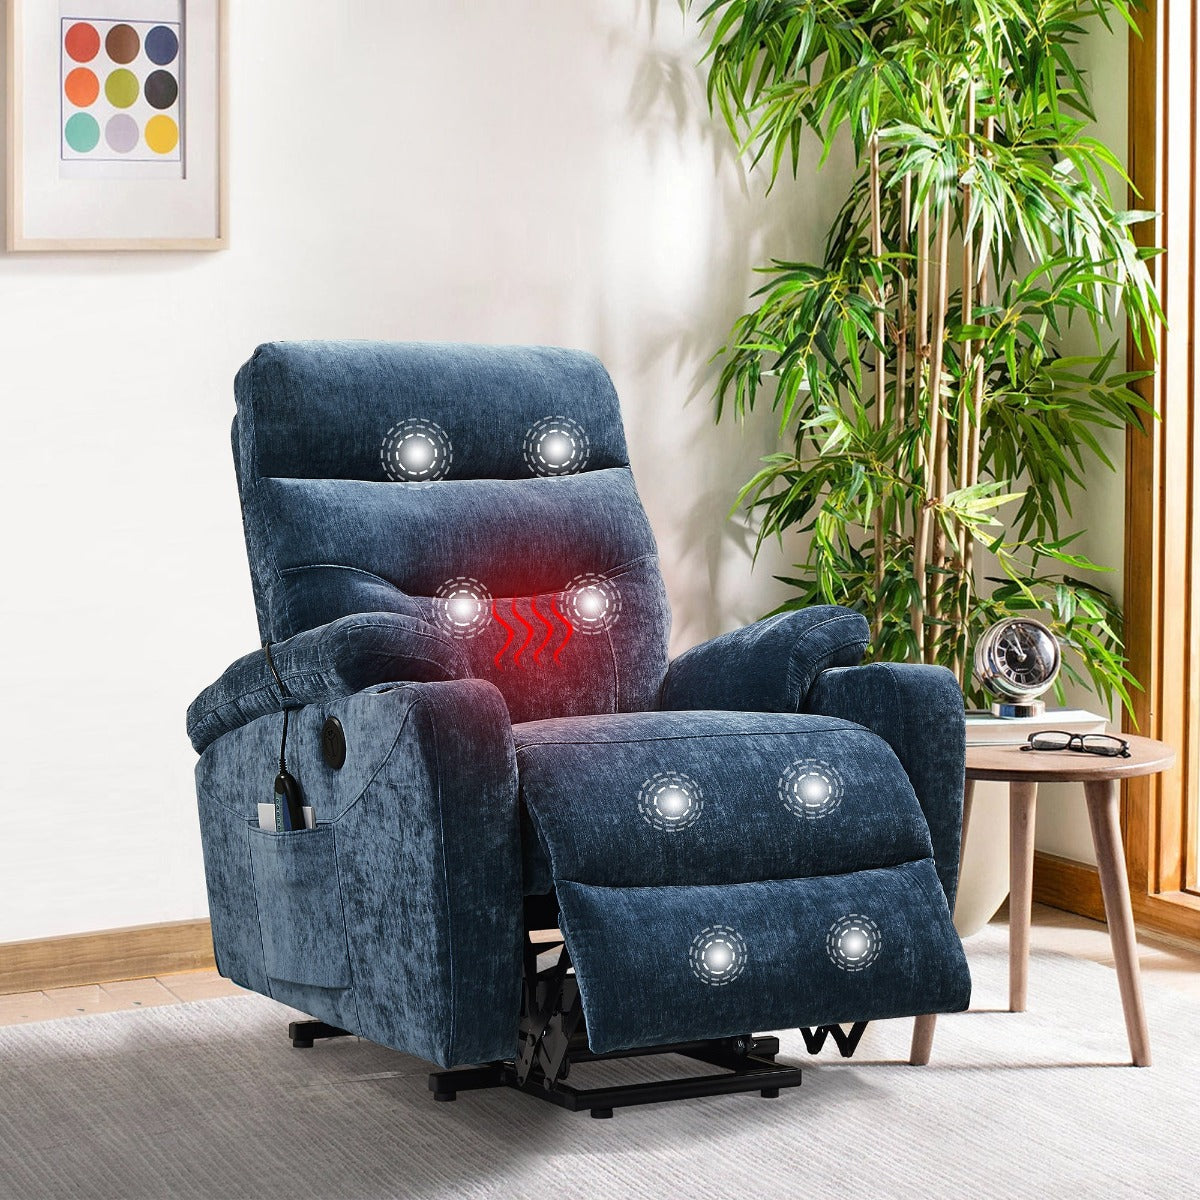 Liyasi Power Lift Recliner Chair with Massage and Heat points - My Lift Chair